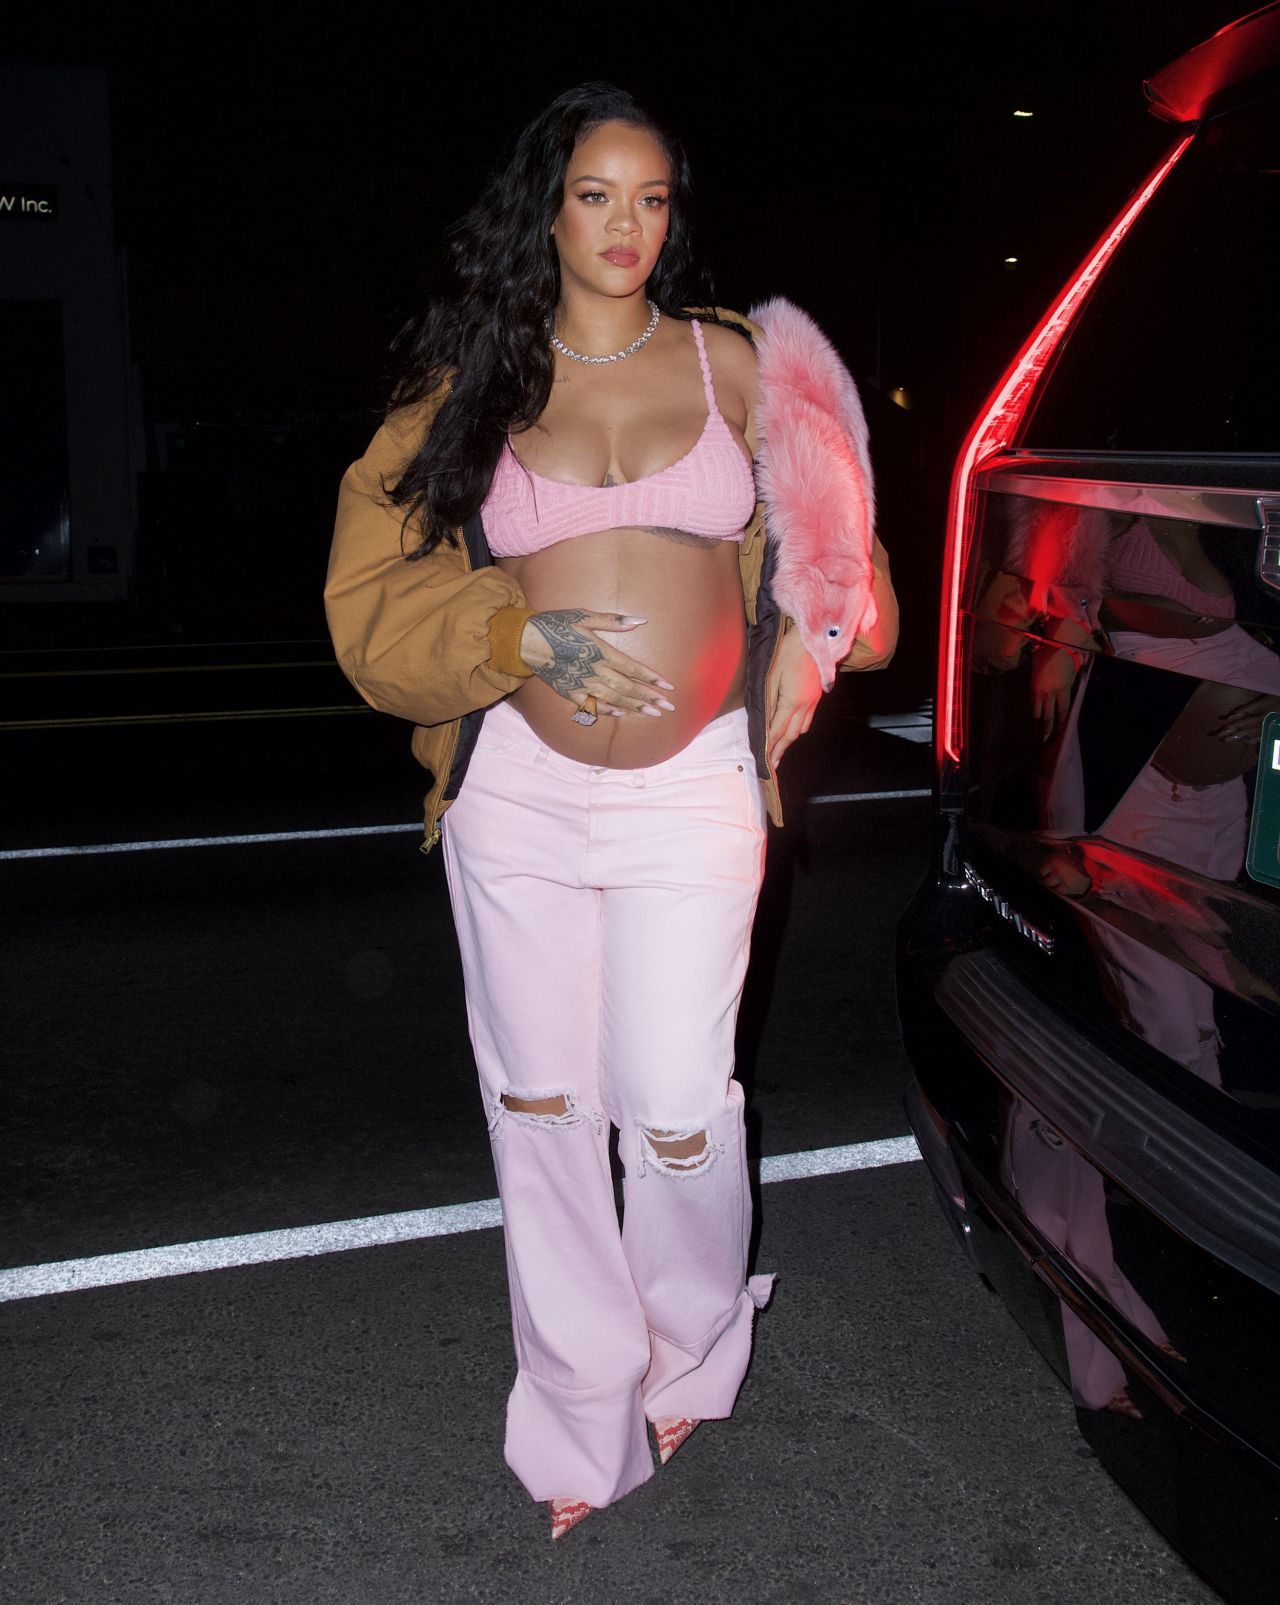 A month before giving birth to her son, Rihanna attended the birthday party of close friend Melissa Forde in a pastel pink Bottega Veneta bralette and low rise baby pink Vetement jeans.